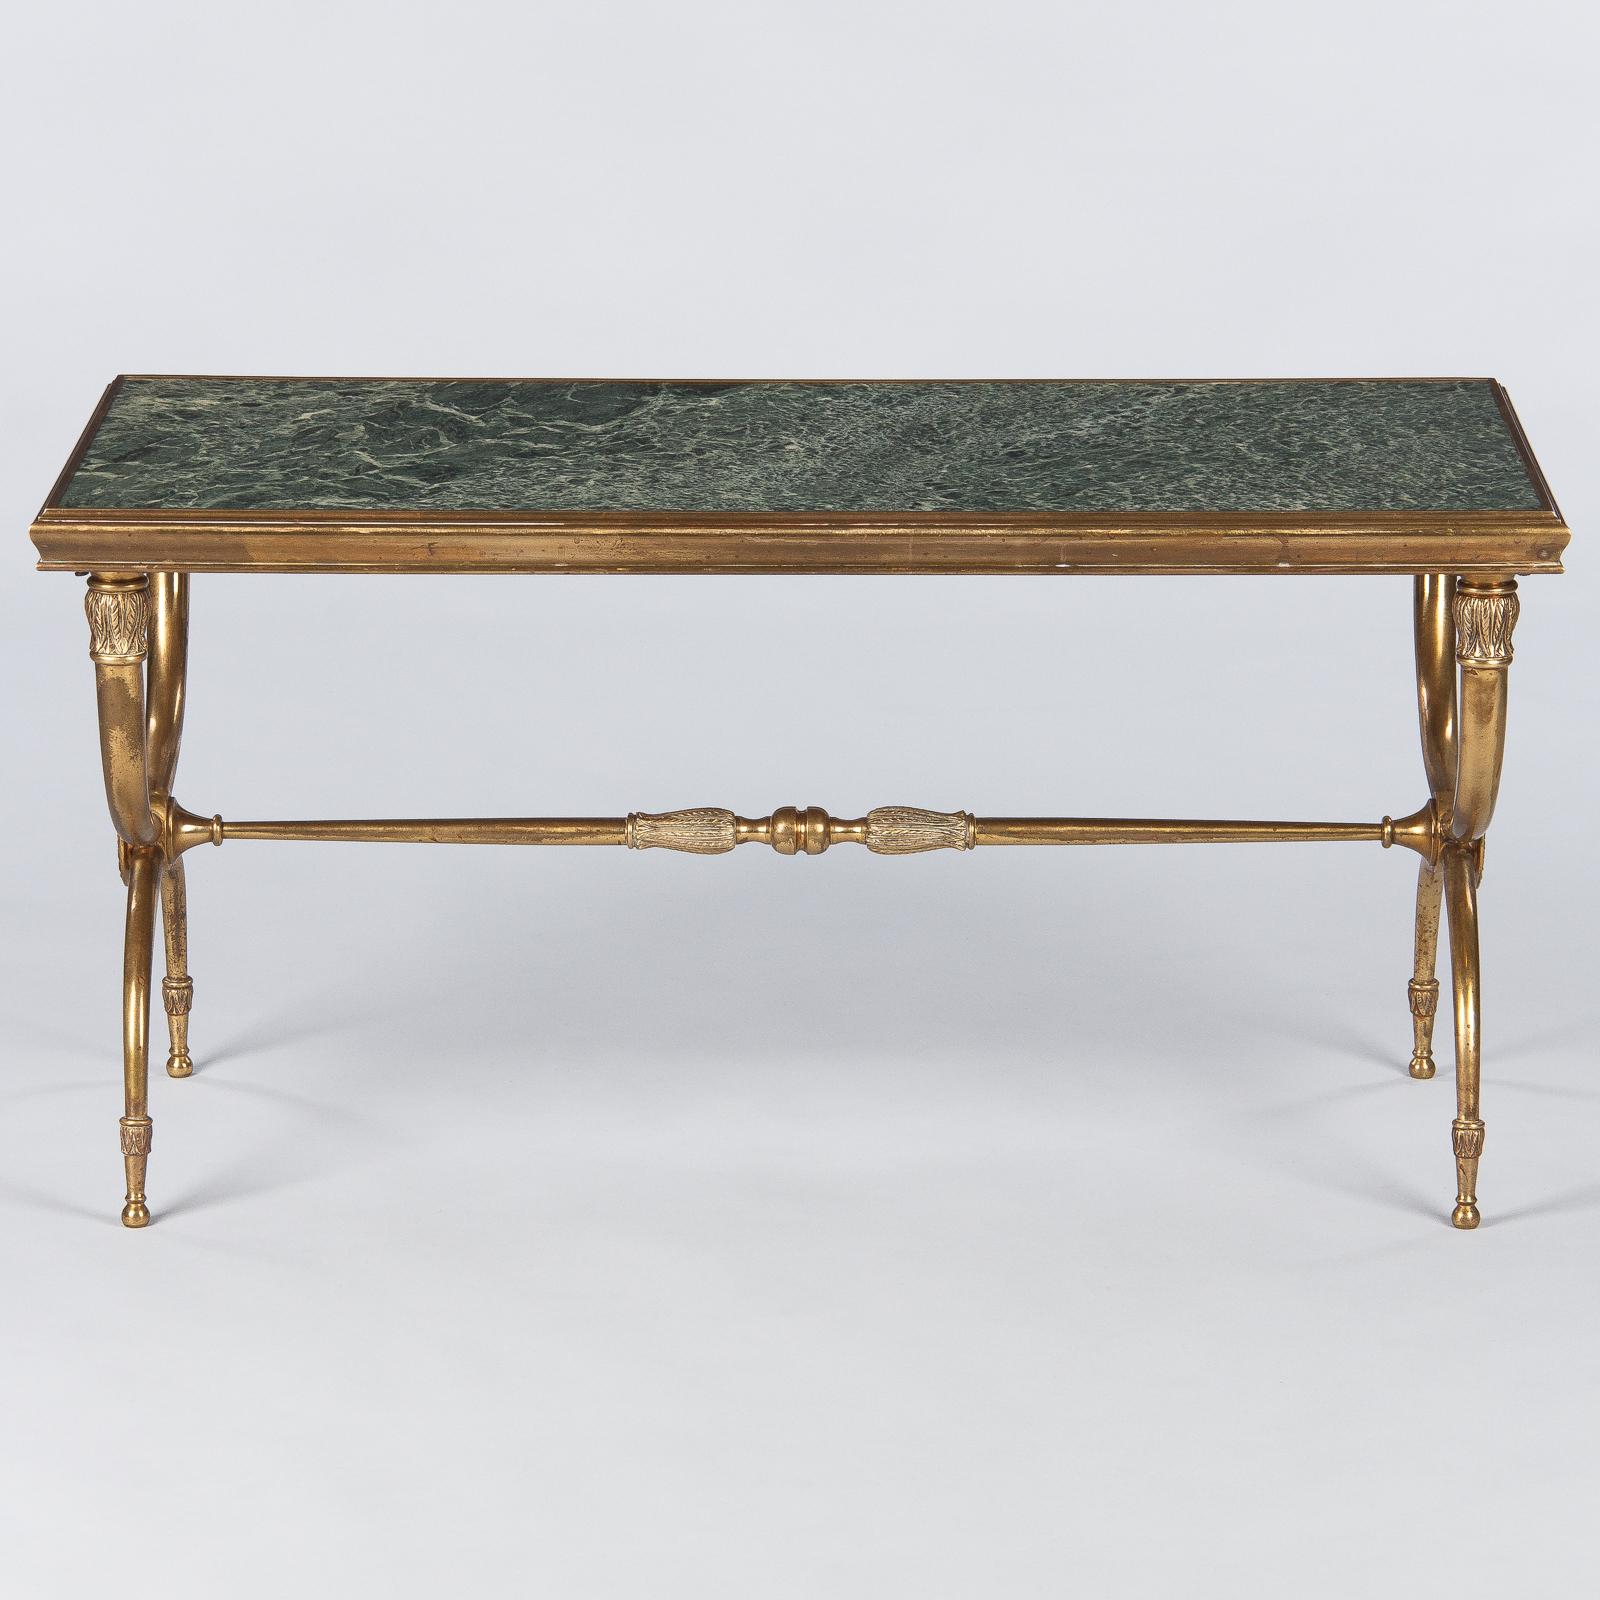 French Midcentury Brass and Marble Coffee Table Attributed to Raymond Subes 1